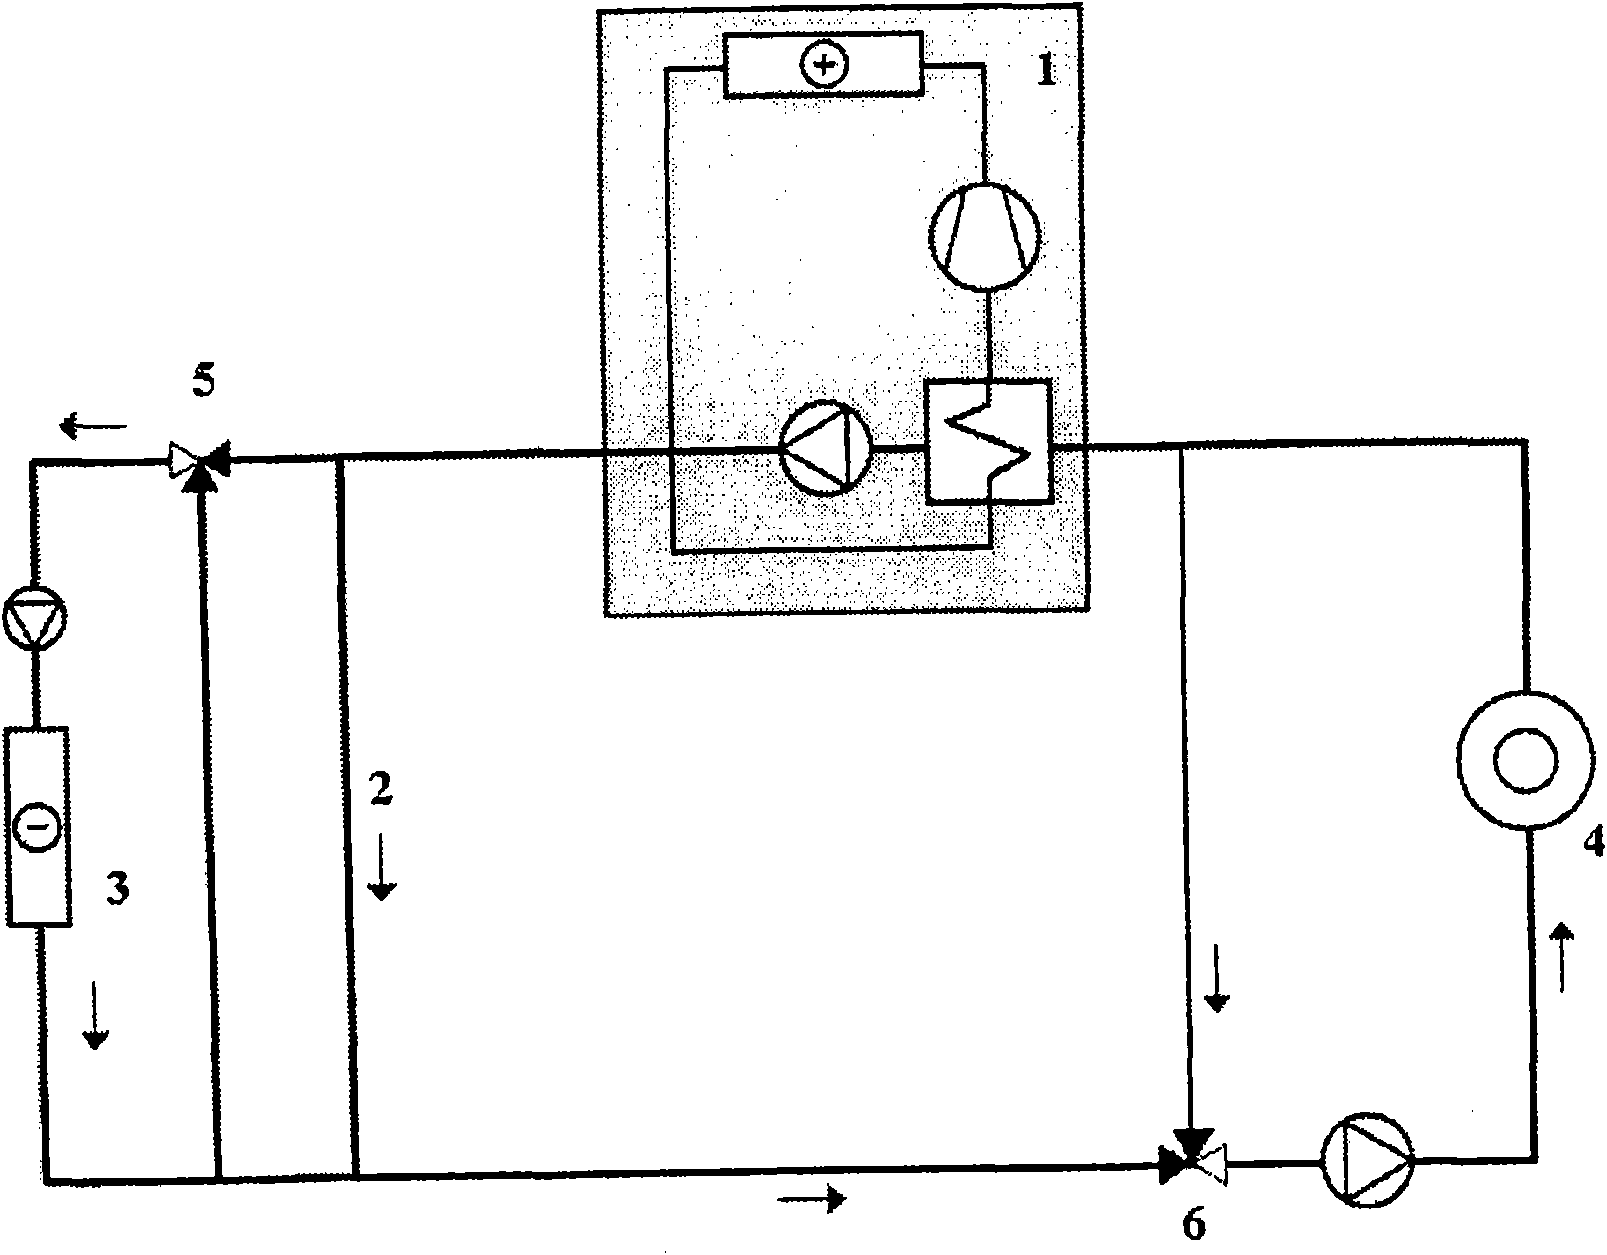 Method for cooling supply air